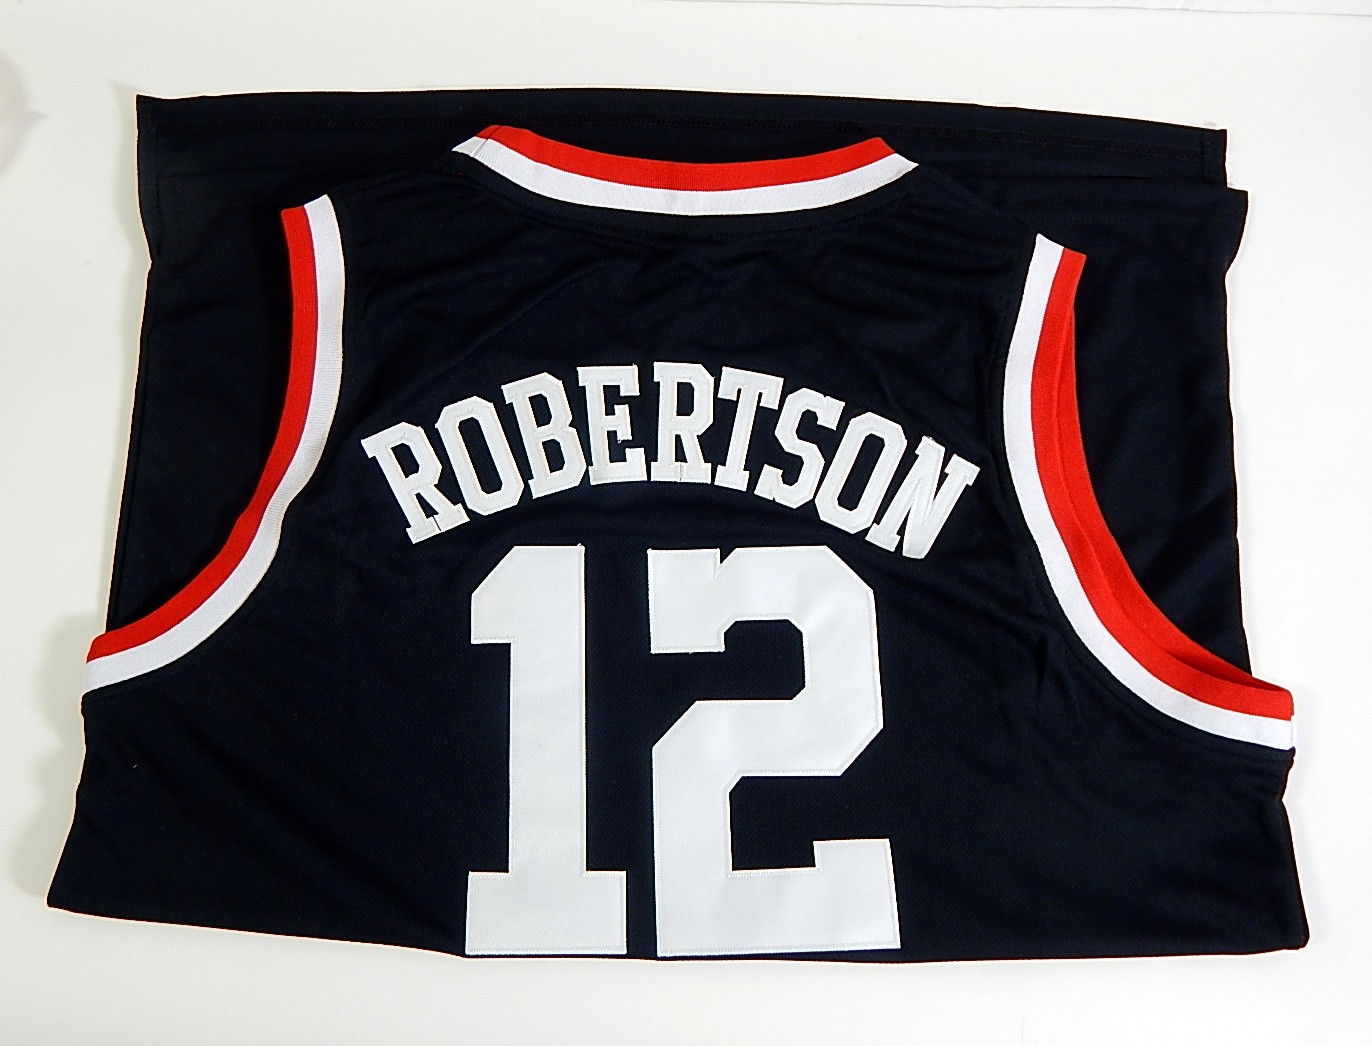 robertson jersey number